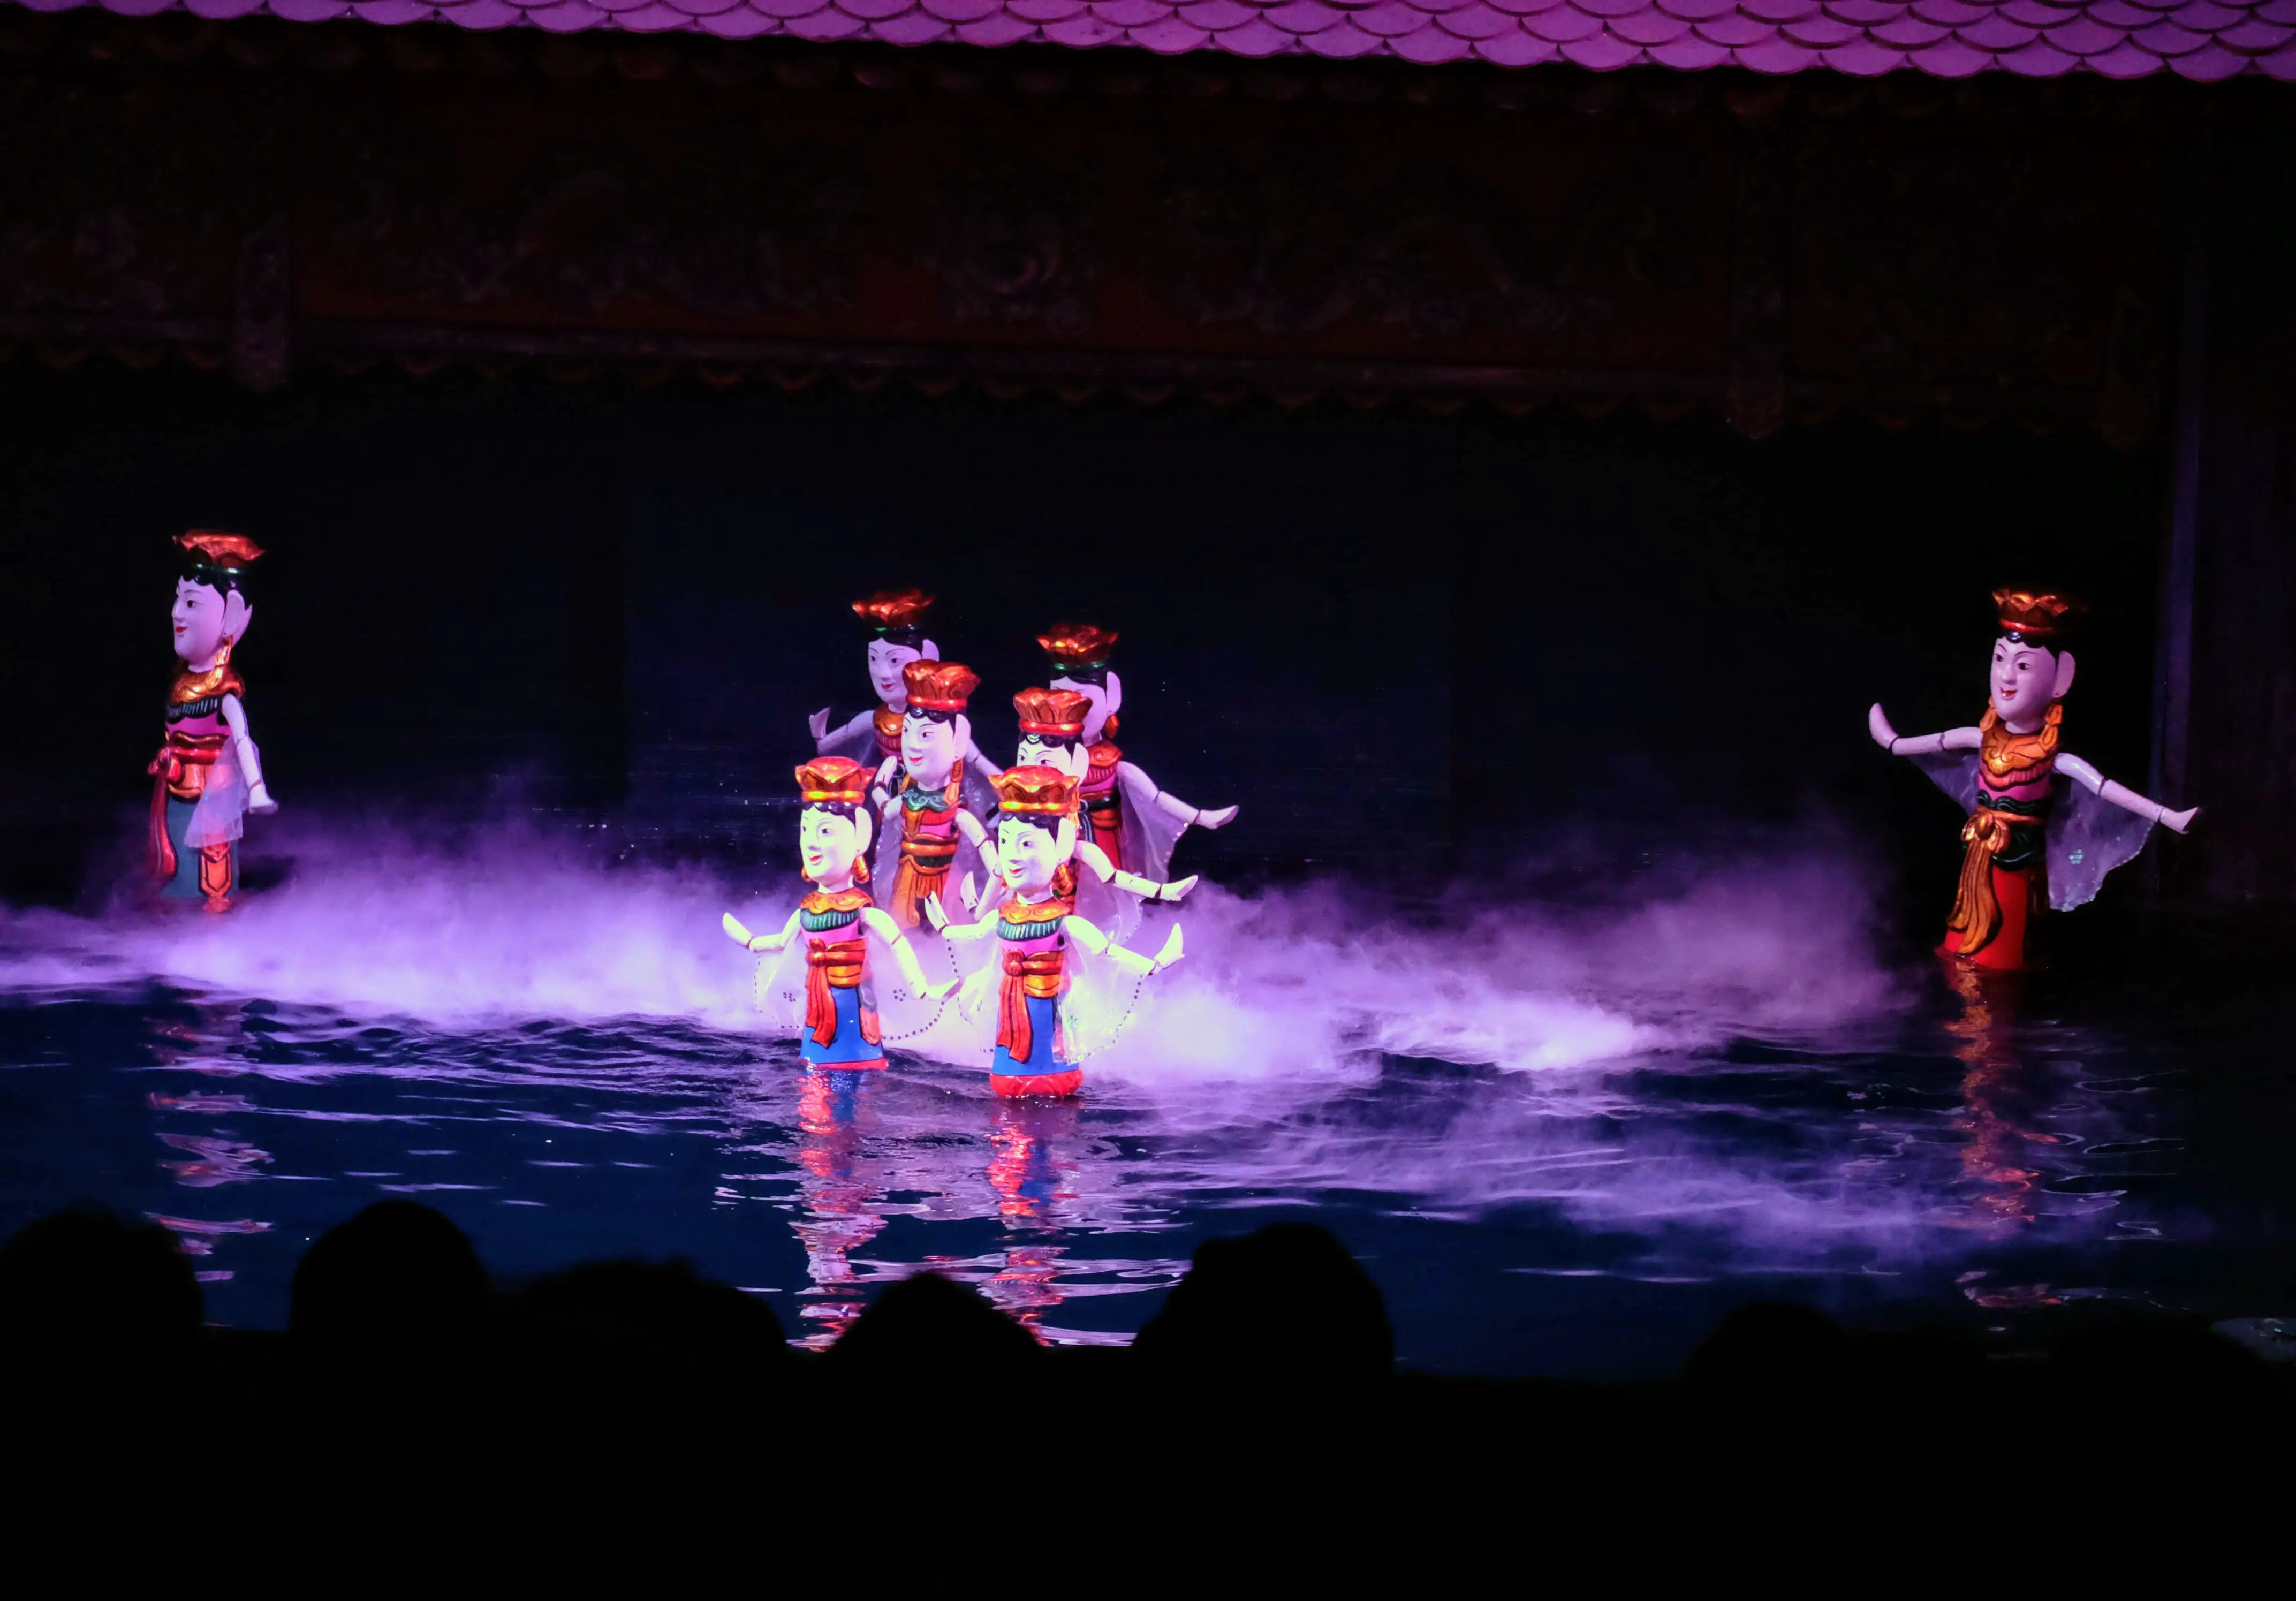 Puppets in the water puppet theatre, Hanoi, Vietnam